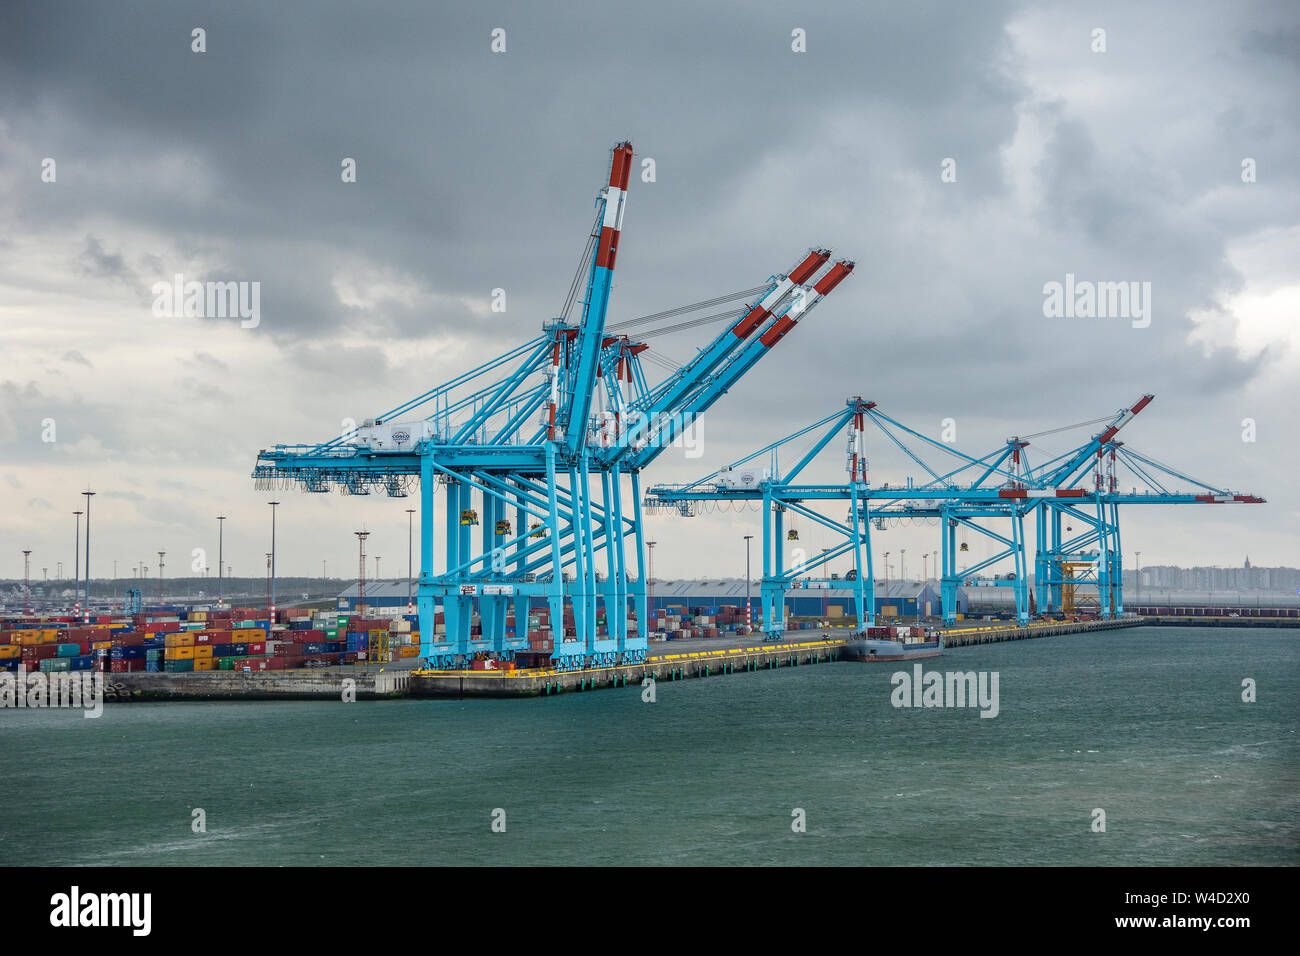 Large cranes on a cloudy day at the dock in the Port of Zeebrugge in Belgium. Stock Photo